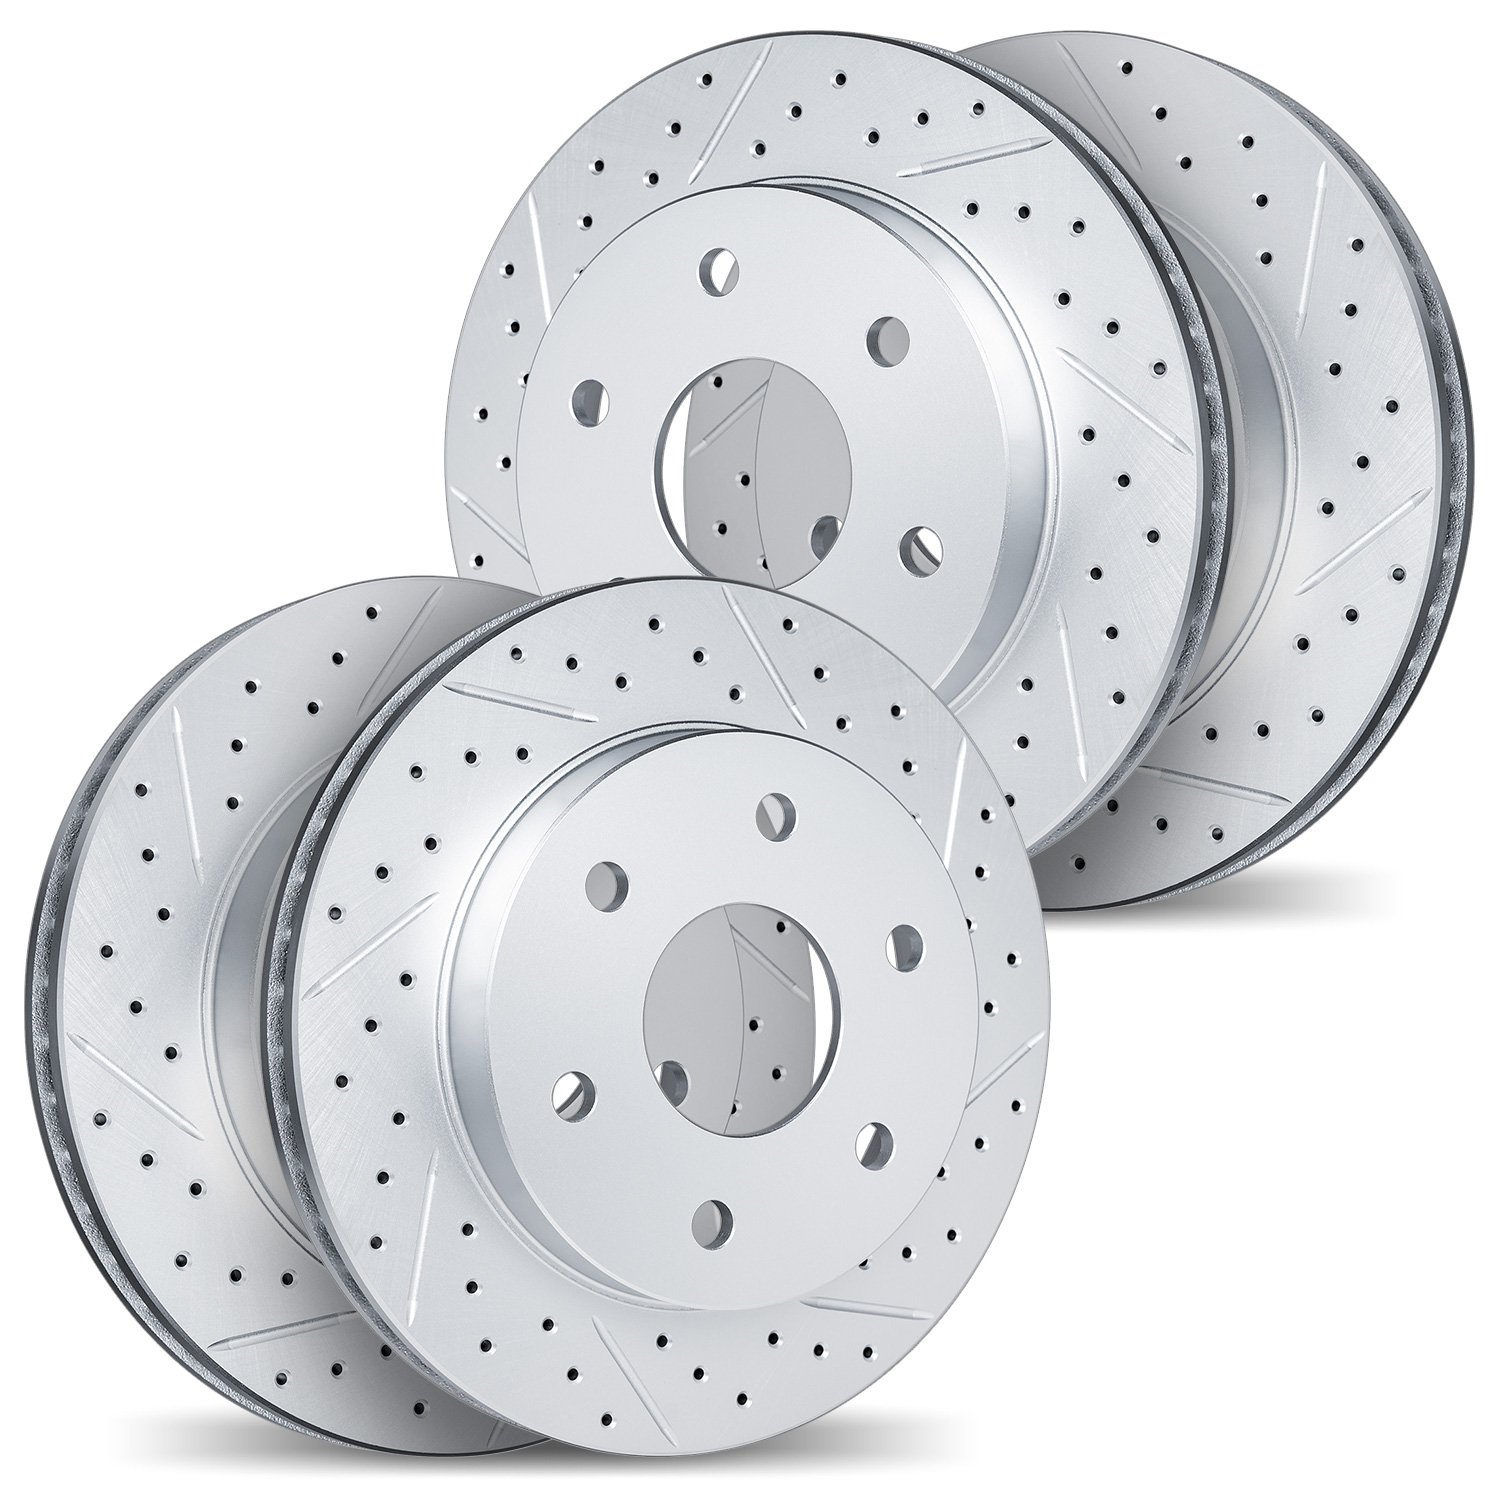 2004-76009 Geoperformance Drilled/Slotted Brake Rotors, 2003-2009 Lexus/Toyota/Scion, Position: Front and Rear